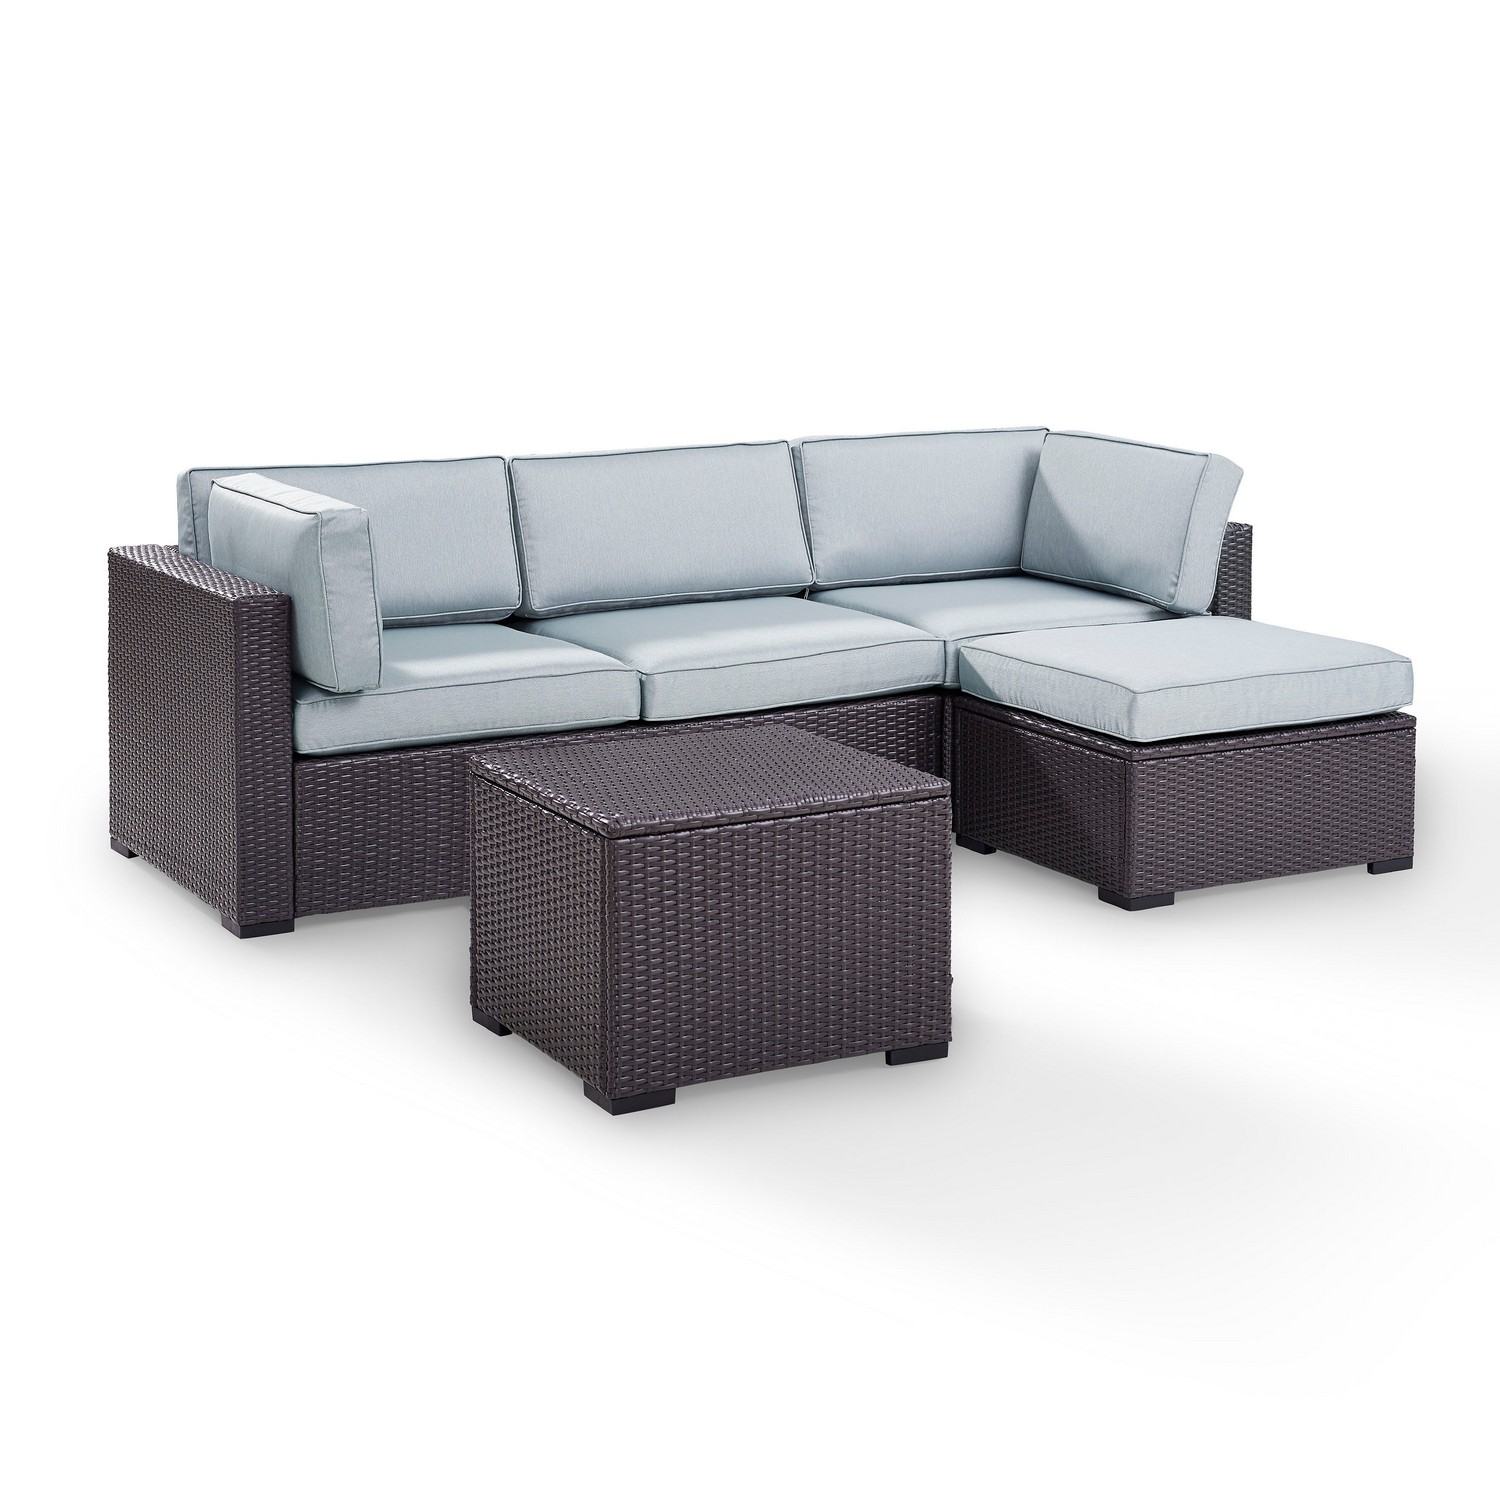 Crosley Biscayne 4-PC Outdoor Wicker Sectional Set - Loveseat, Corner Chair, Ottoman, Coffee Table - Mist/Brown